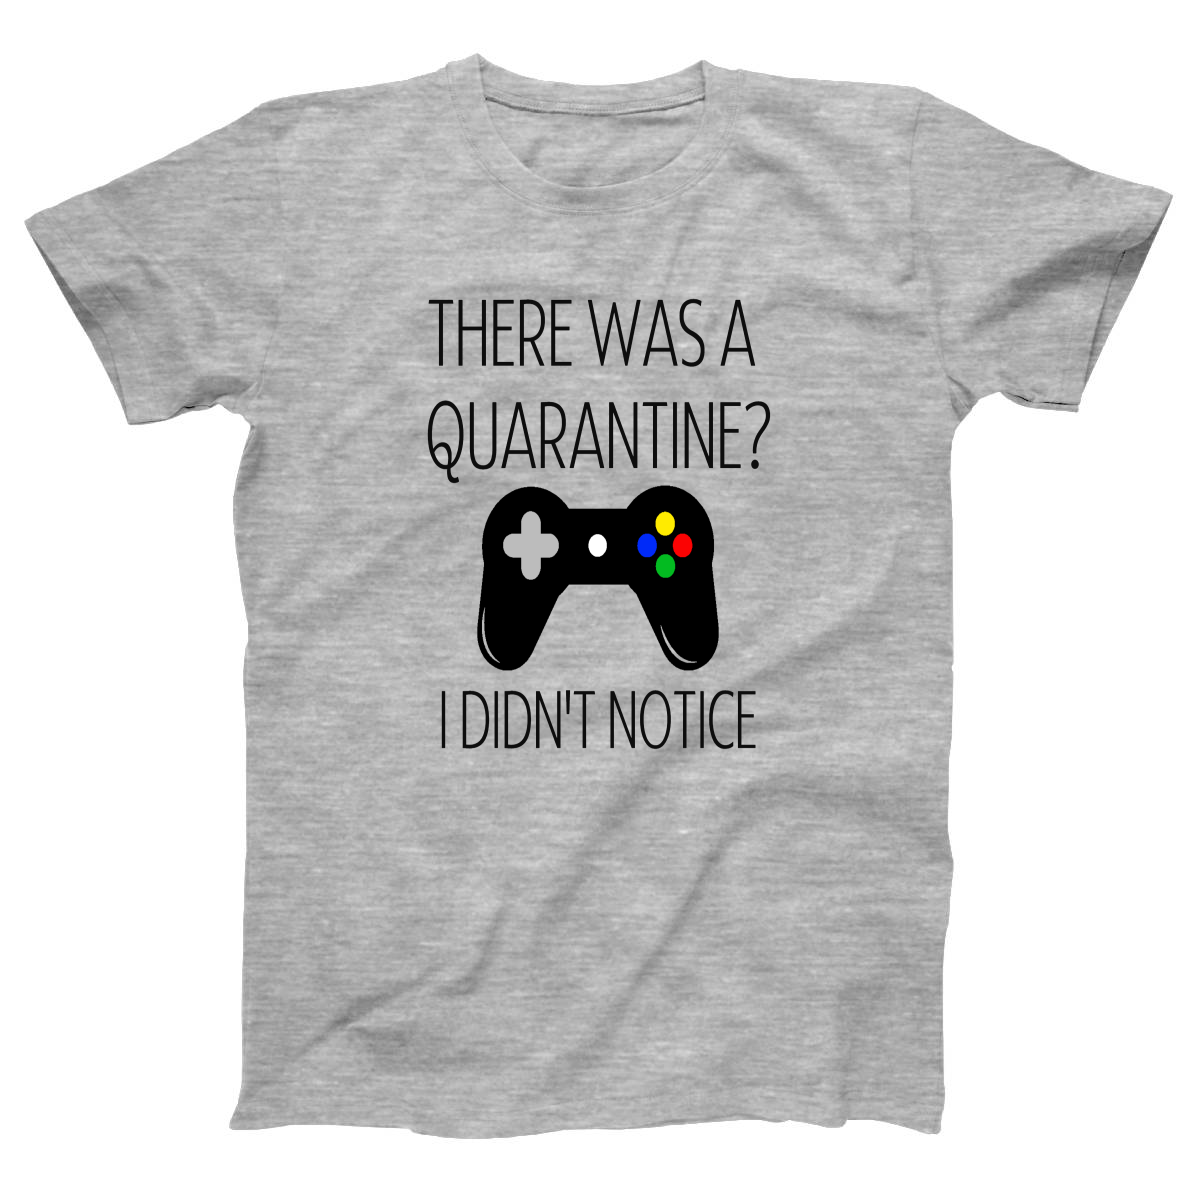 THERE WAS A QUARANTİNE Women's T-shirt | Gray